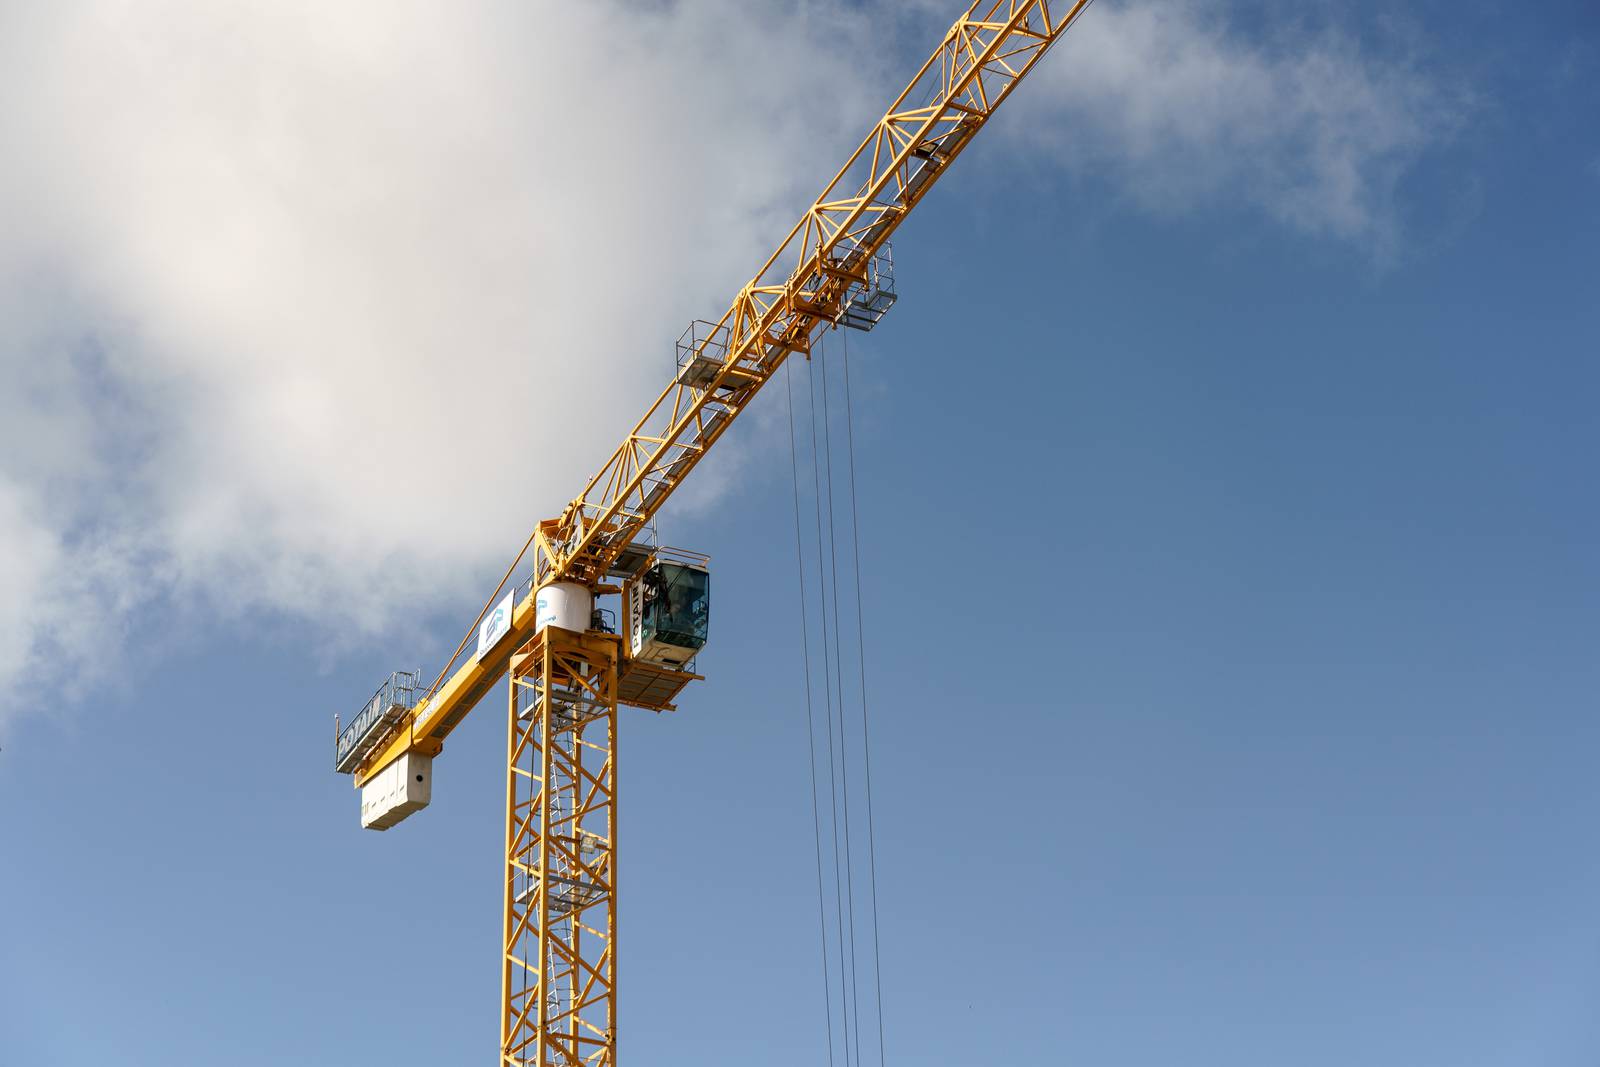 A crane at a residential construction site in Sandyford, south Dublin, Ireland, on Tuesday, May 11, 2021. The mass purchase of affordable houses  on the market for about 400,000 euros ($490,000)  set off a public firestorm and highlights the growing tension over the squeeze in urban housing and the role of large investors. Photographer: Paulo Nunes dos Santos/Bloomberg